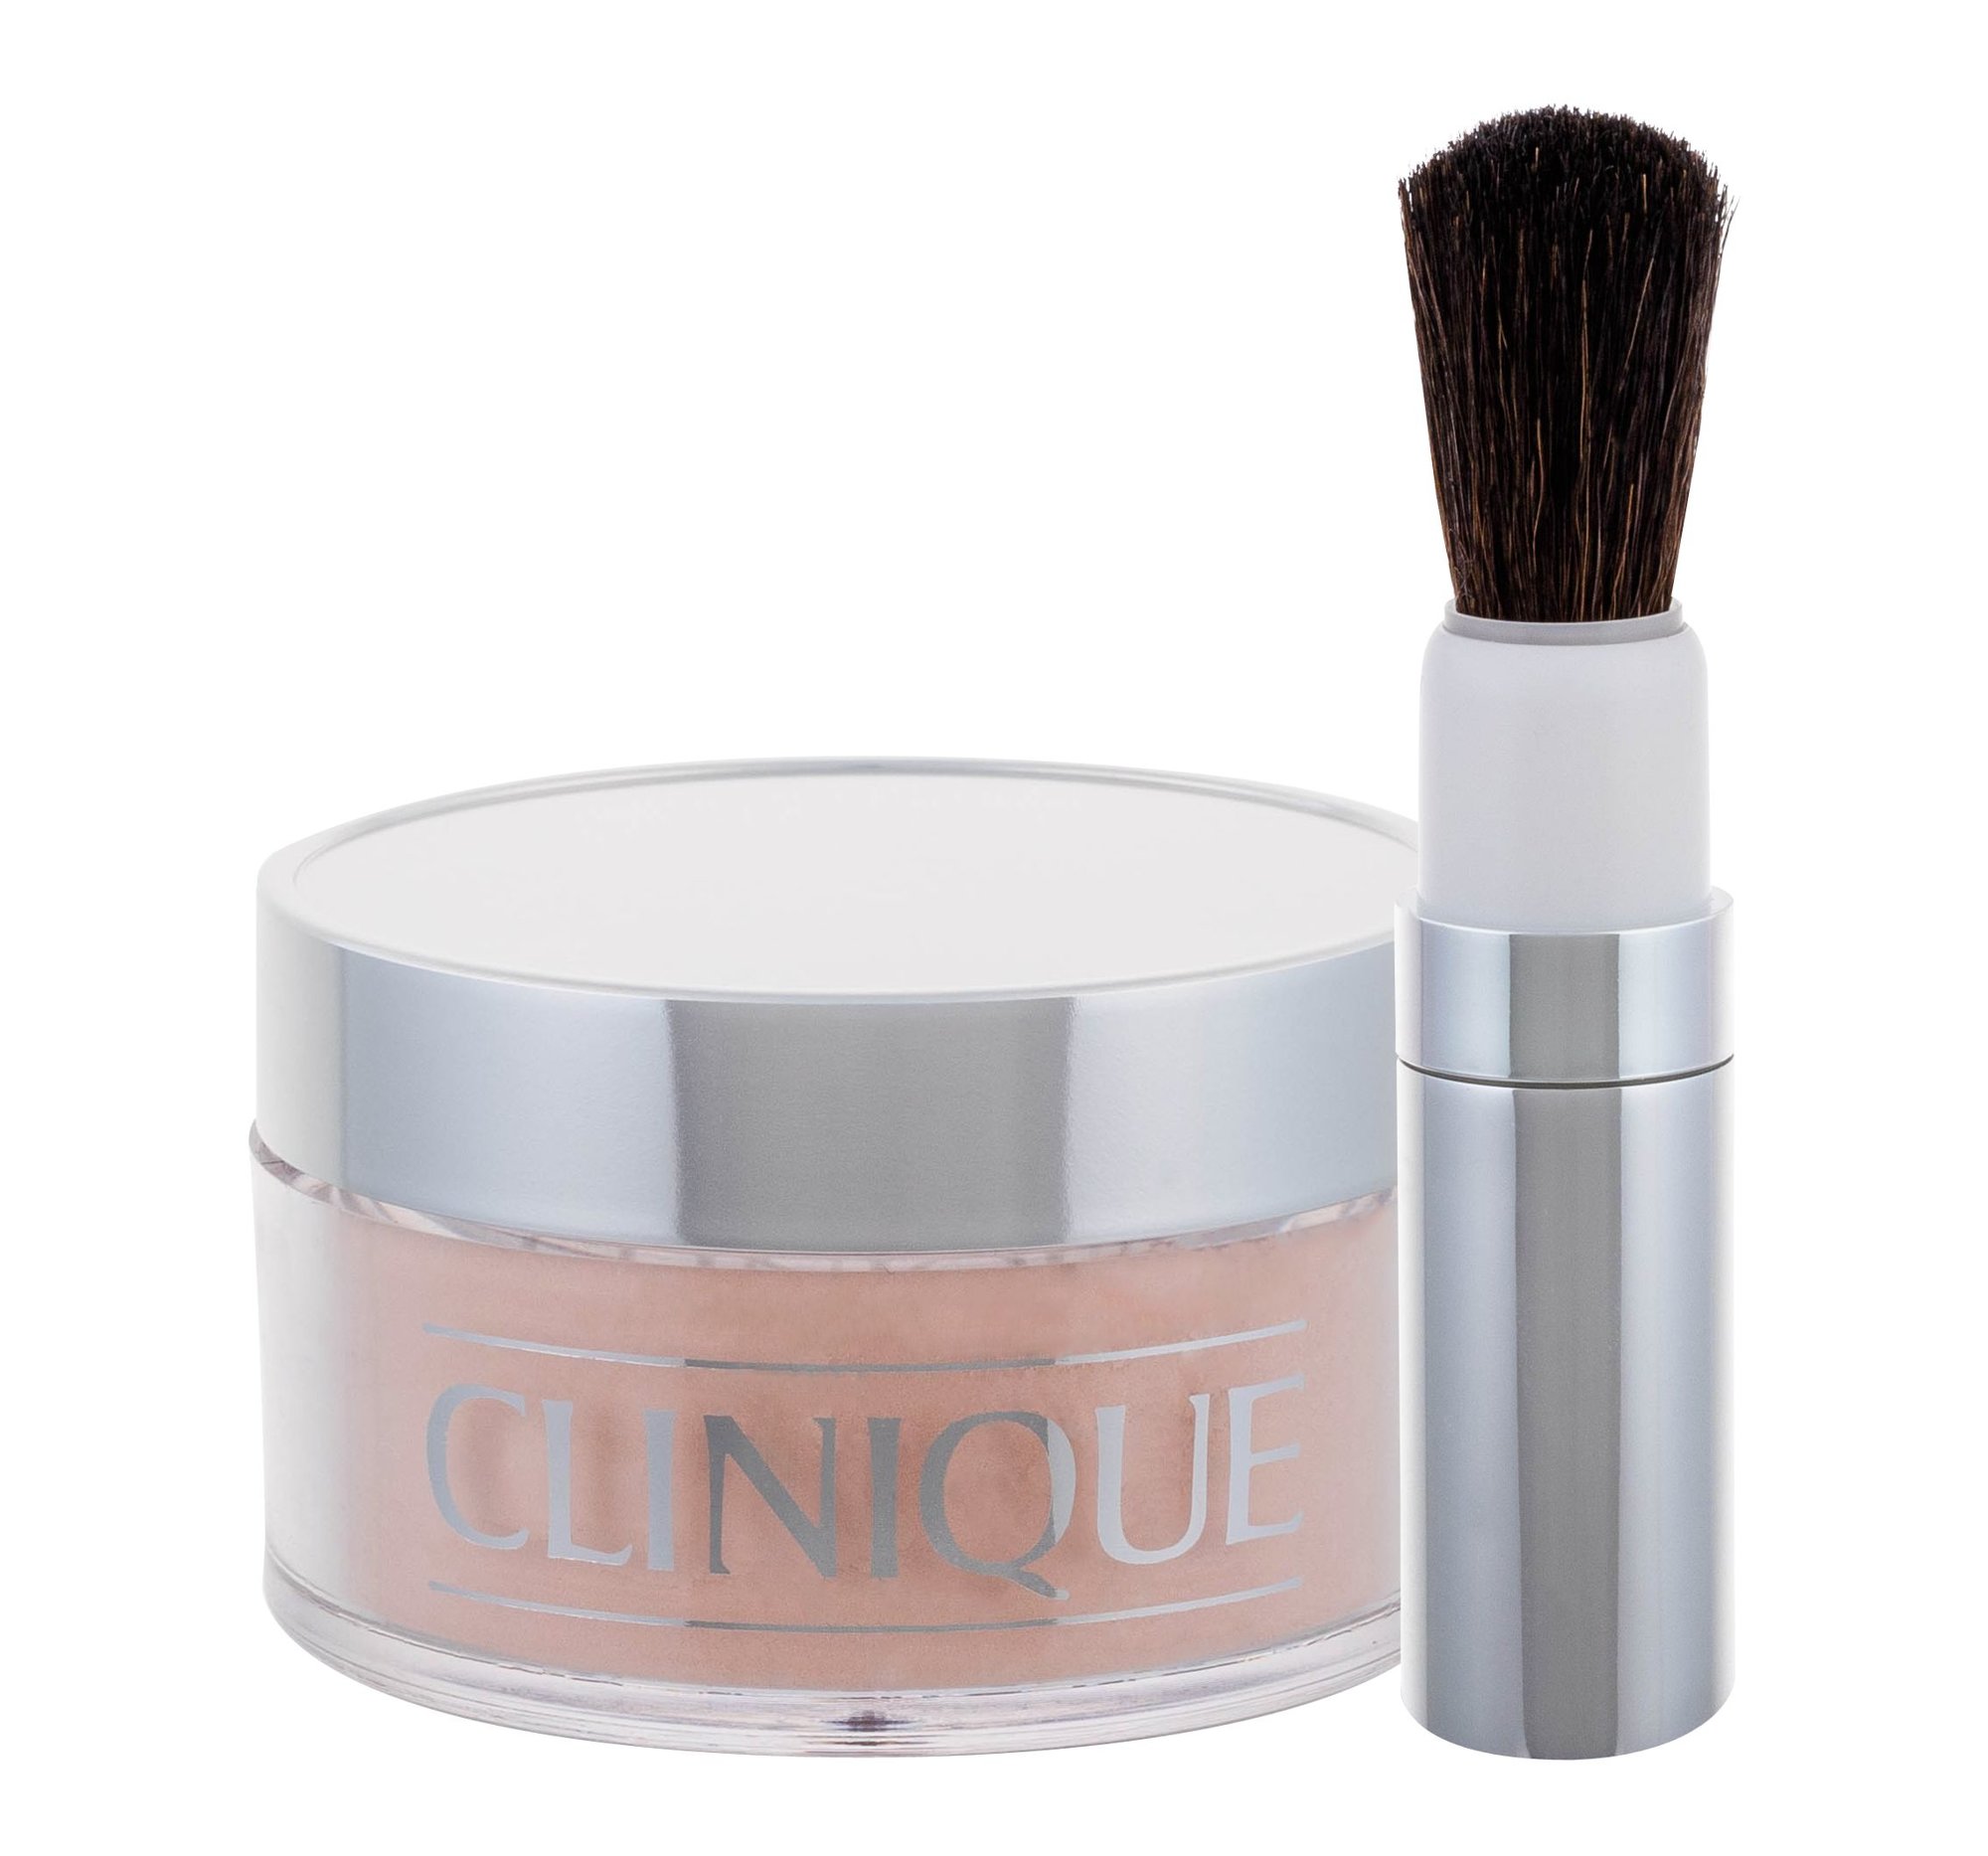 Clinique Blended Face Powder And Brush 25g sausa pudra